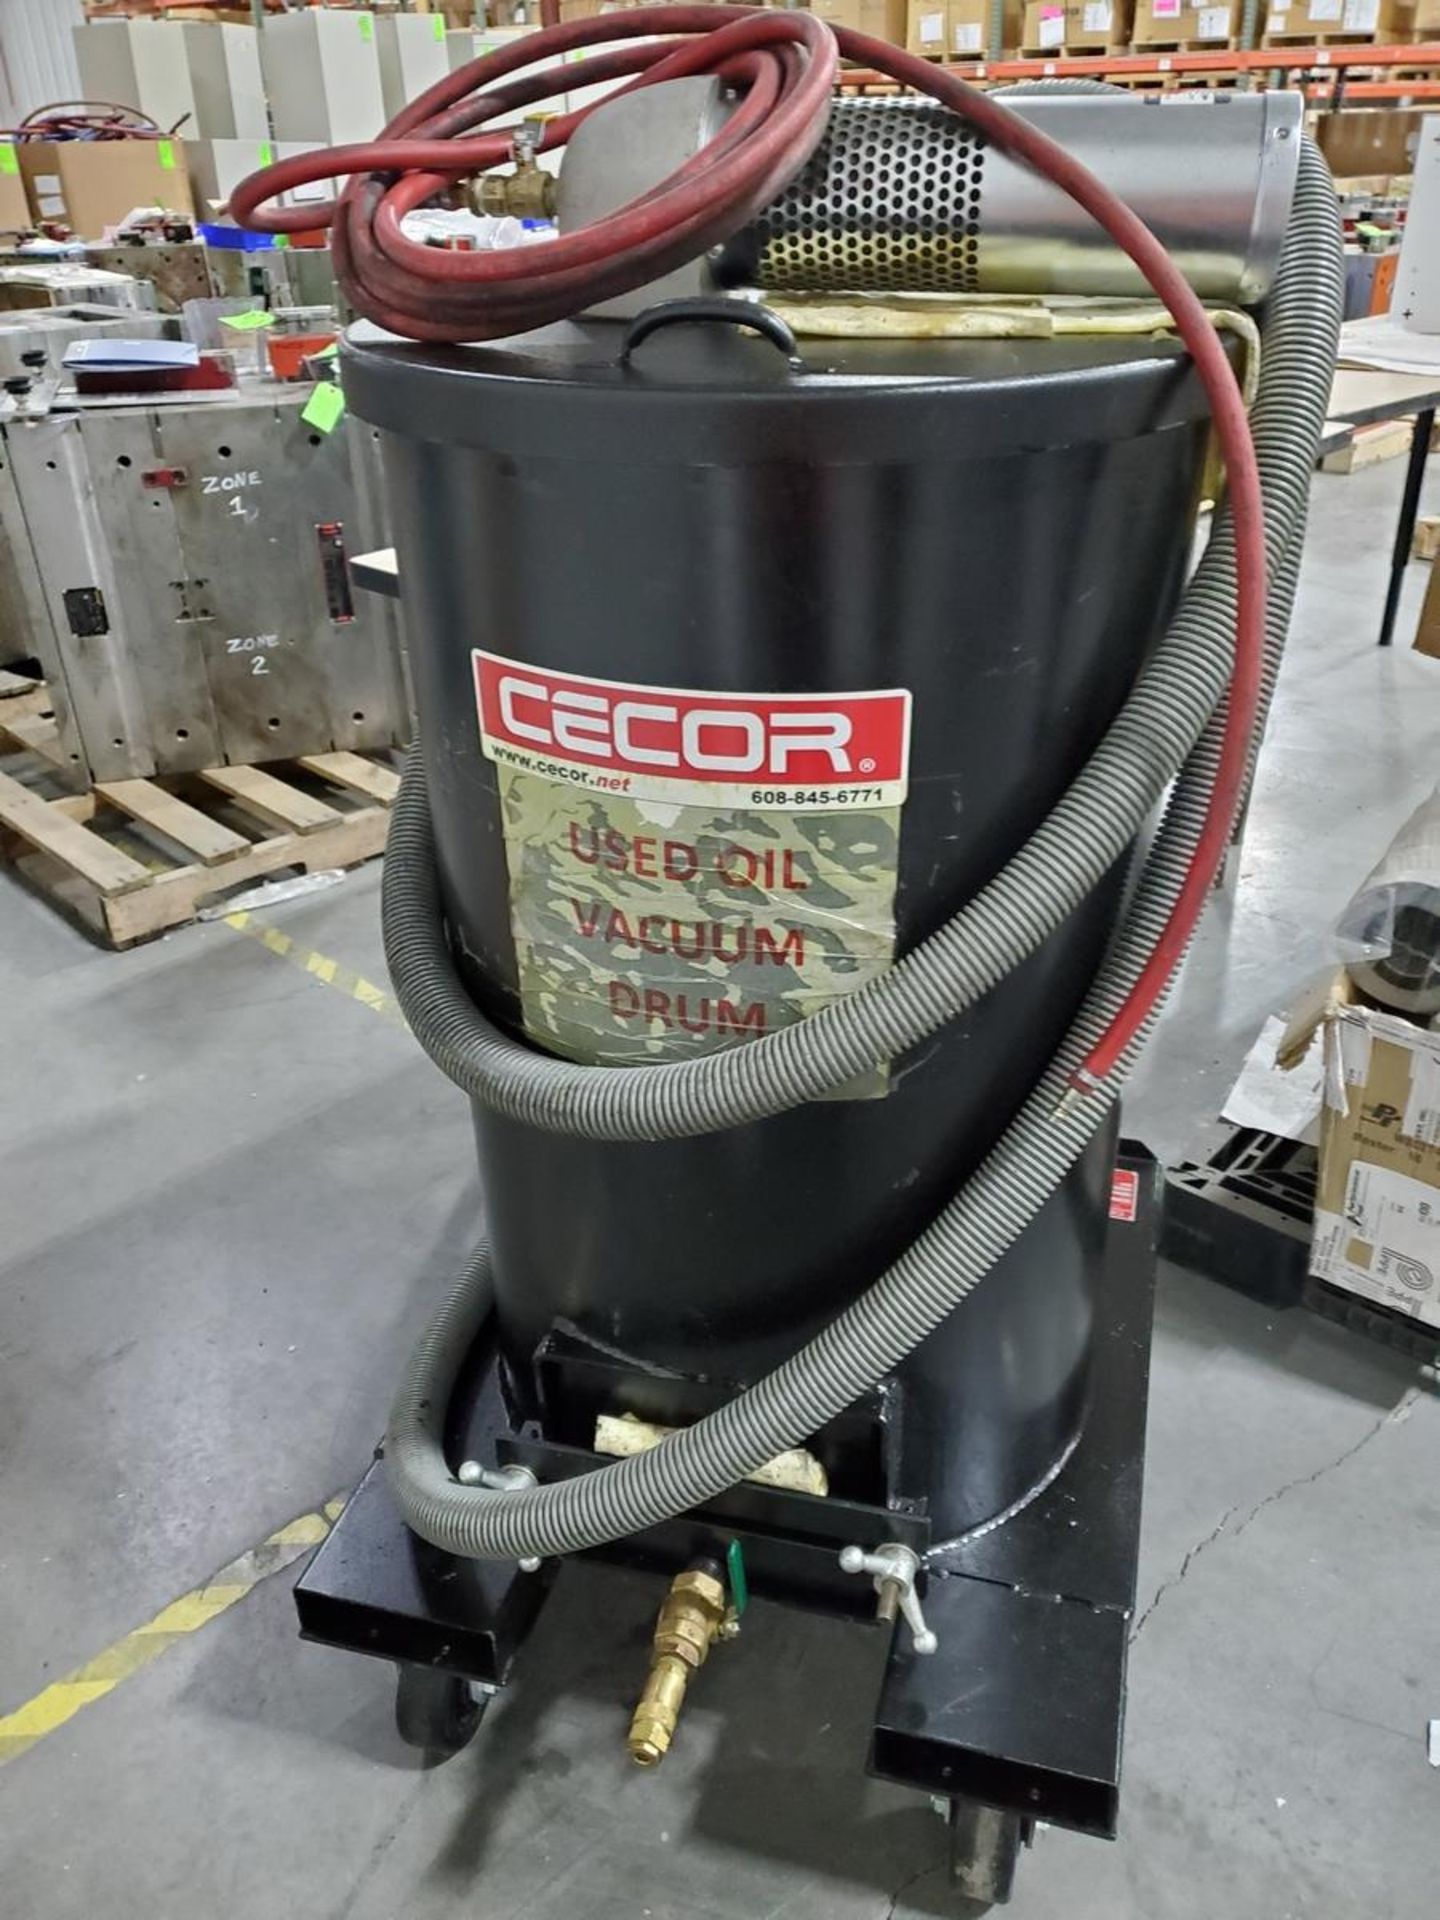 Cecor TX-55PL 55 Gallon Oil Pump with Cart - Image 3 of 4